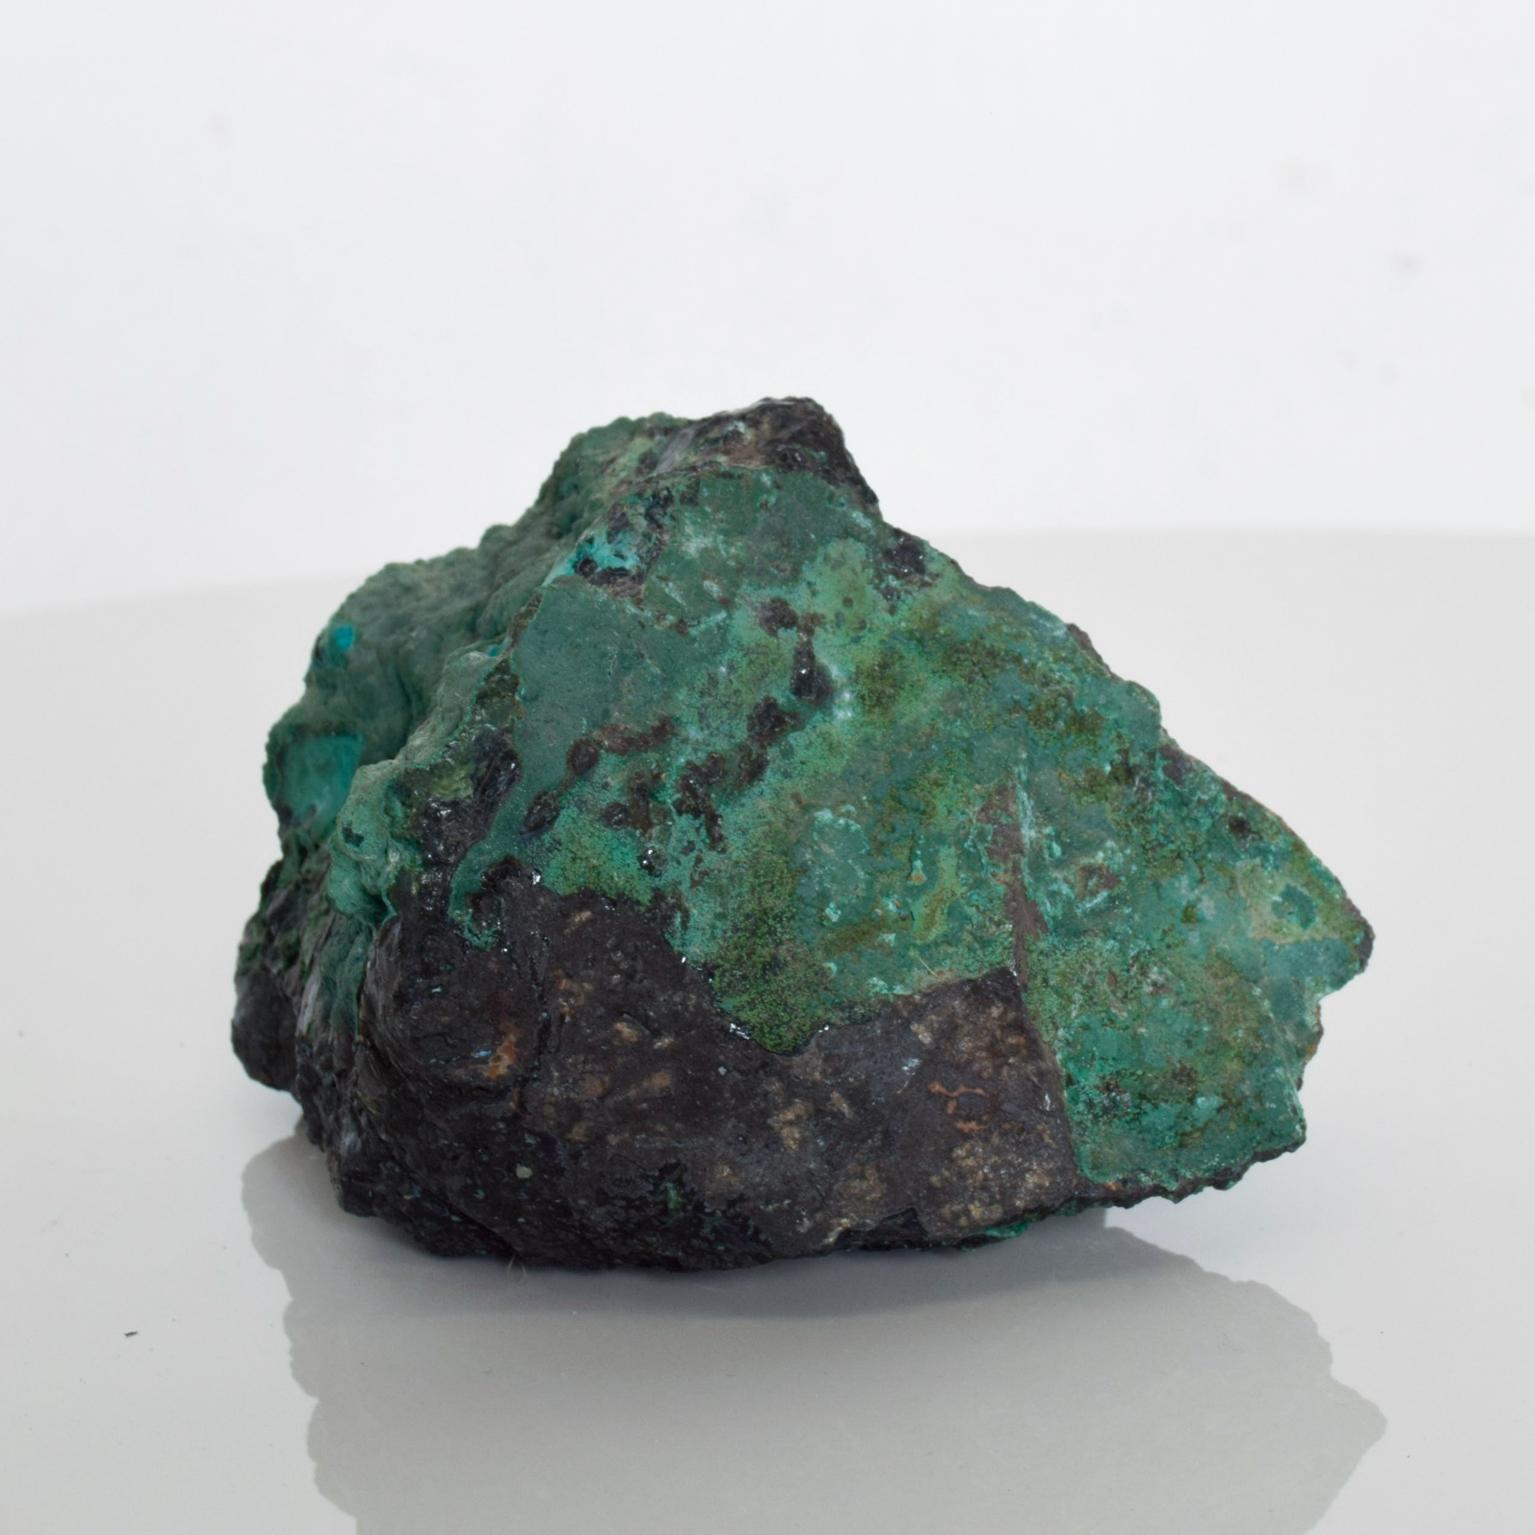 1960s Raw Stone Paperweight Natural Malachite Azurite
Decorative Stone in Malachite and Azurite beautiful aqua hues.
3.5 H x 5D x 4.5 W
Original natural state condition - refer to images please.